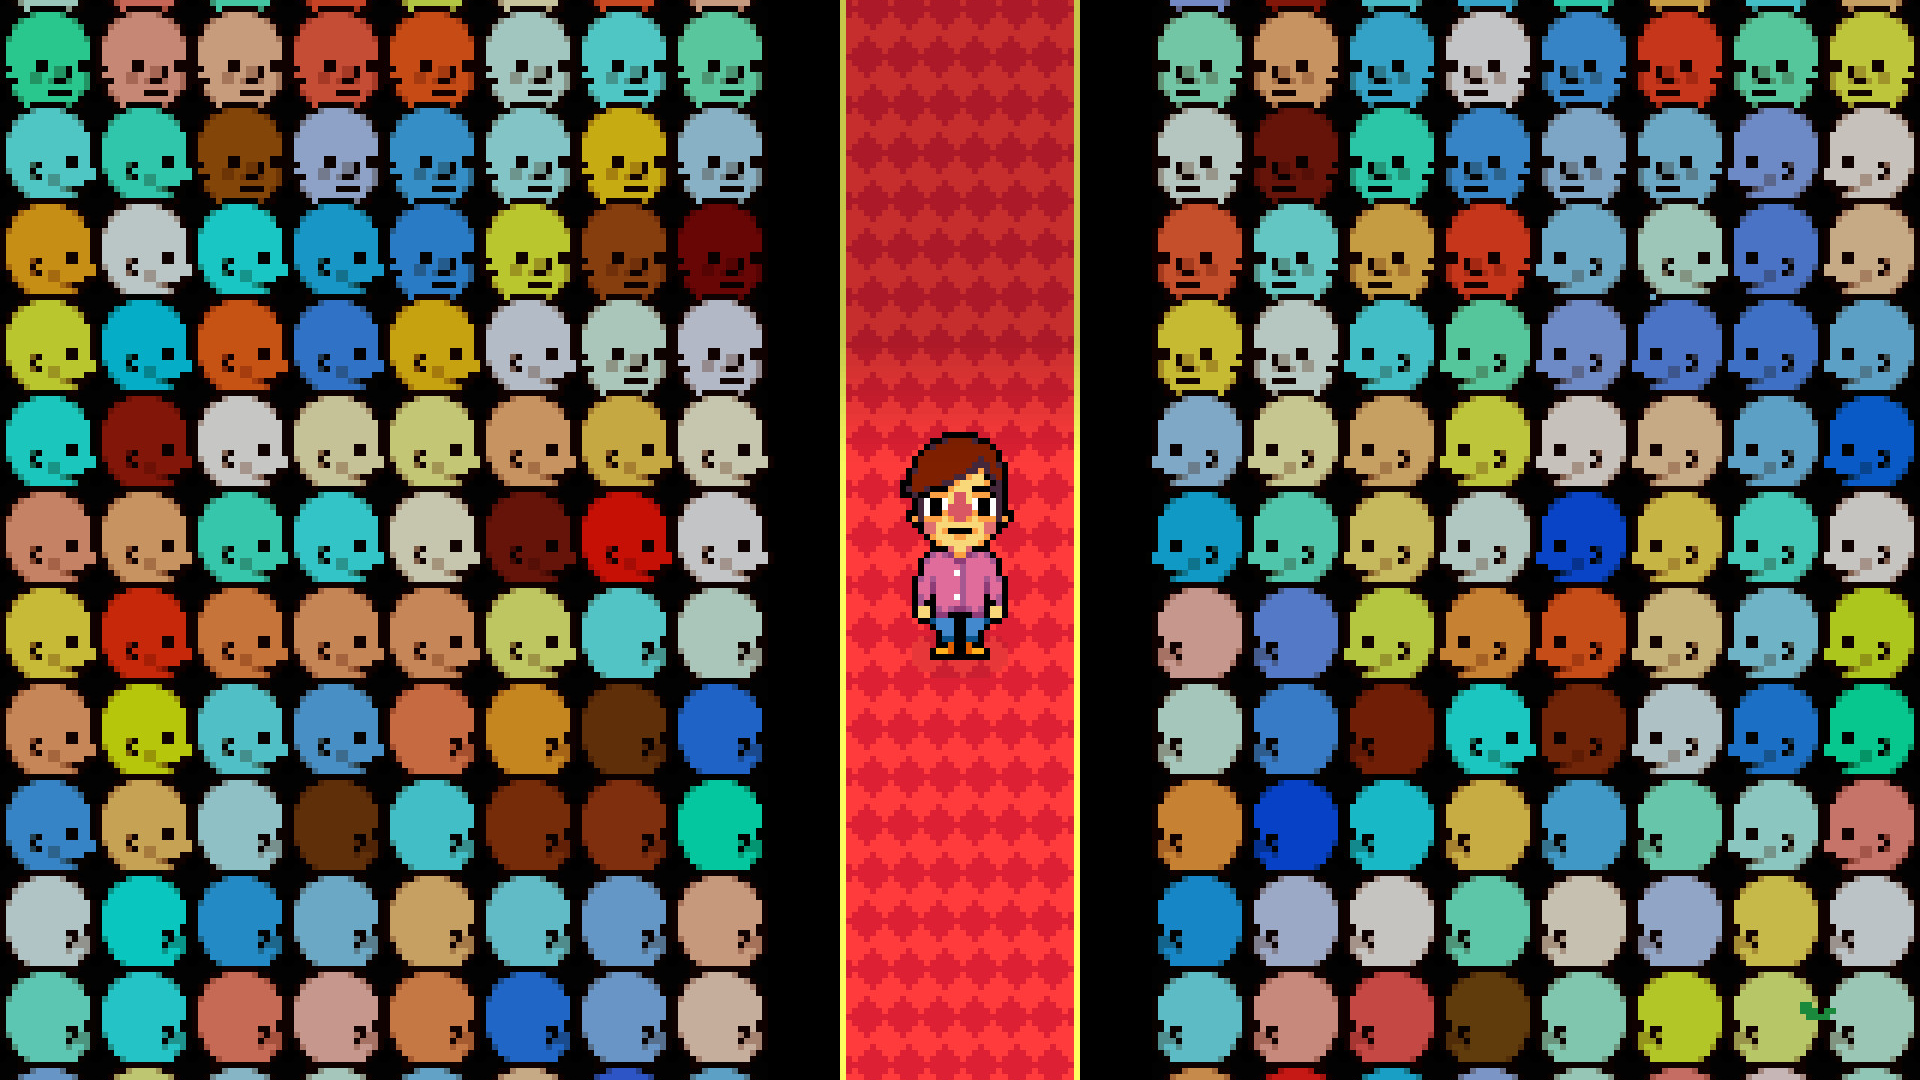 A small pixel man stands on a red carpet amid a sea of colourful faces in Knuckle Sandwich